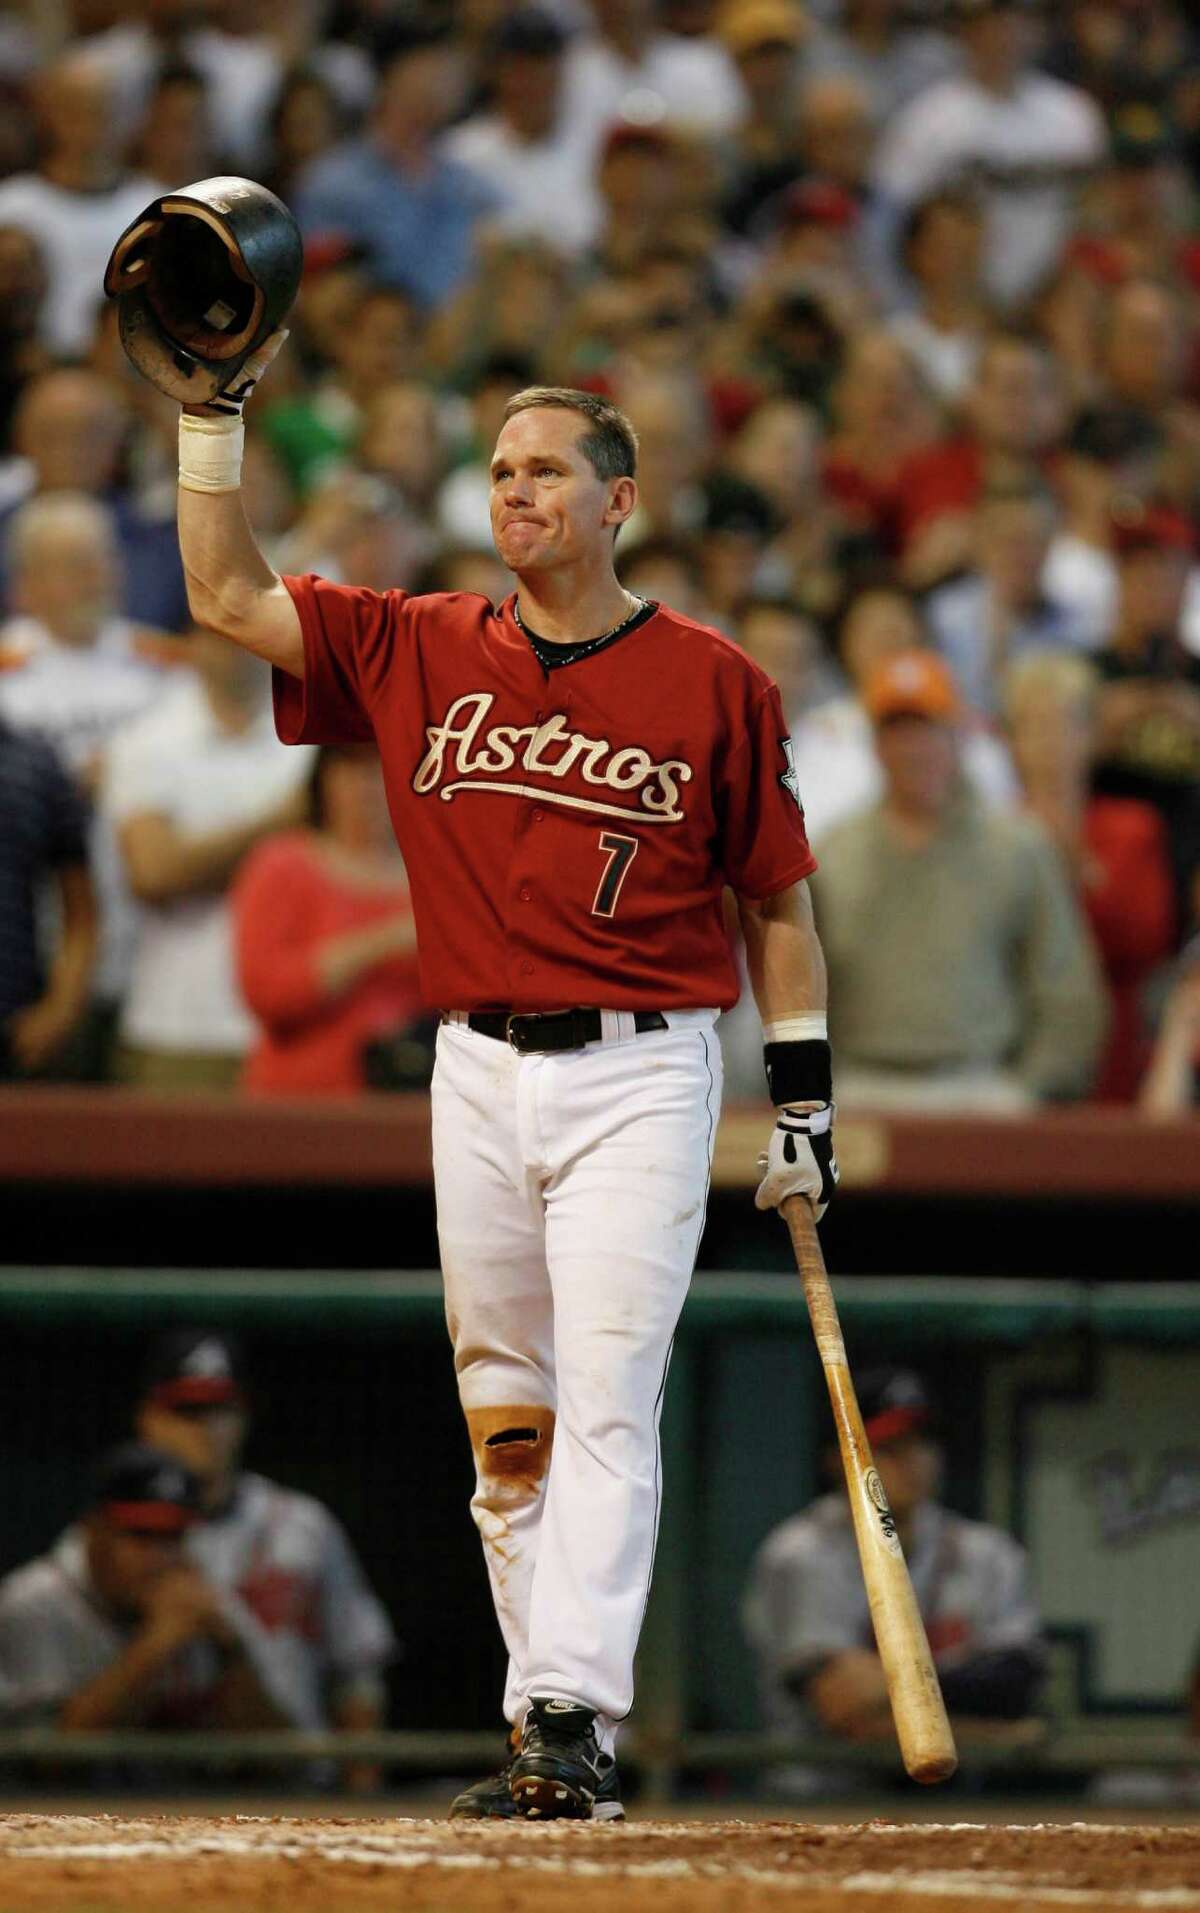 CRAIG BIGGIO, ASTROS Positions: C, 2B Seasons: 20 Years: 1988-2007 Highlights: A seven-time All-Star and one of only nine players with more than 3,000 hits with the same team. Retired as an Astro. First Astro to be voted into baseball’s Hall of Fame.